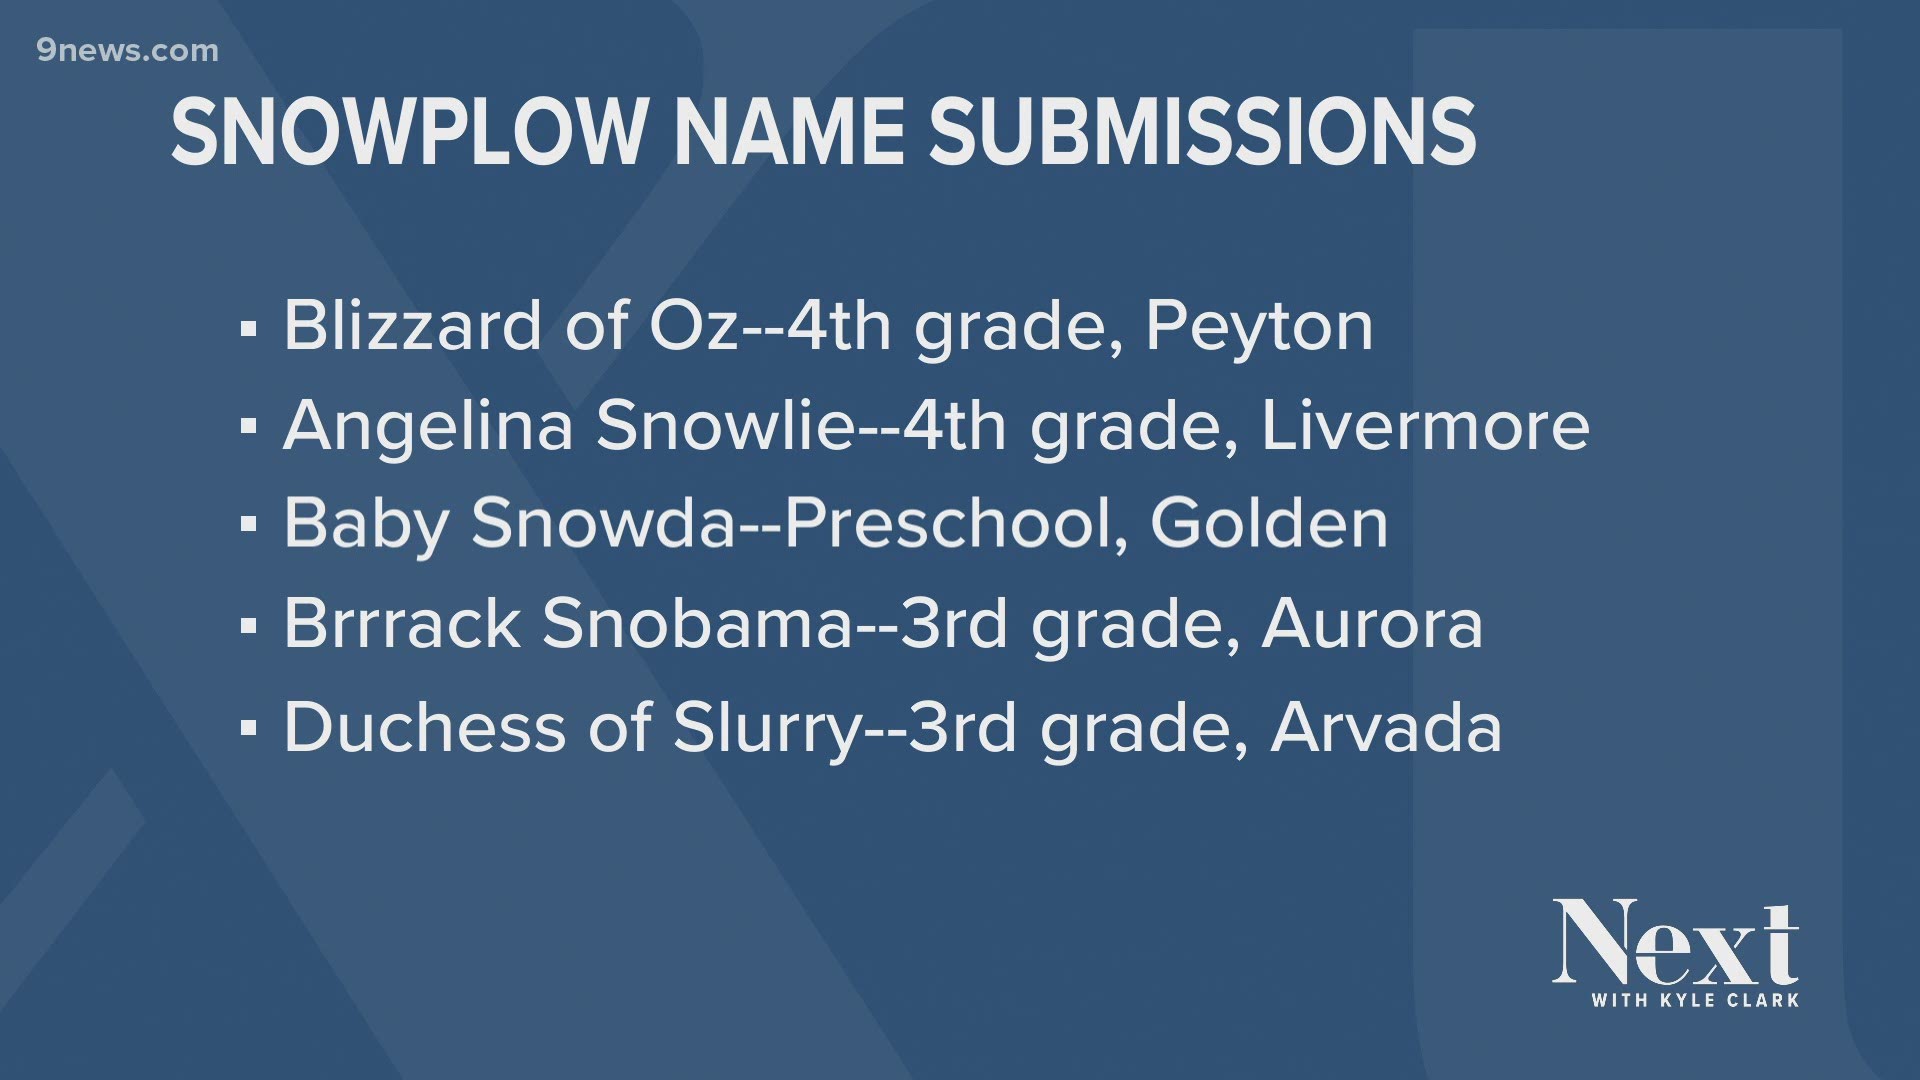 Like Minnesota, Colorado asked elementary school students to submit name ideas for 20 of the state's snowplows. They did not disappoint.